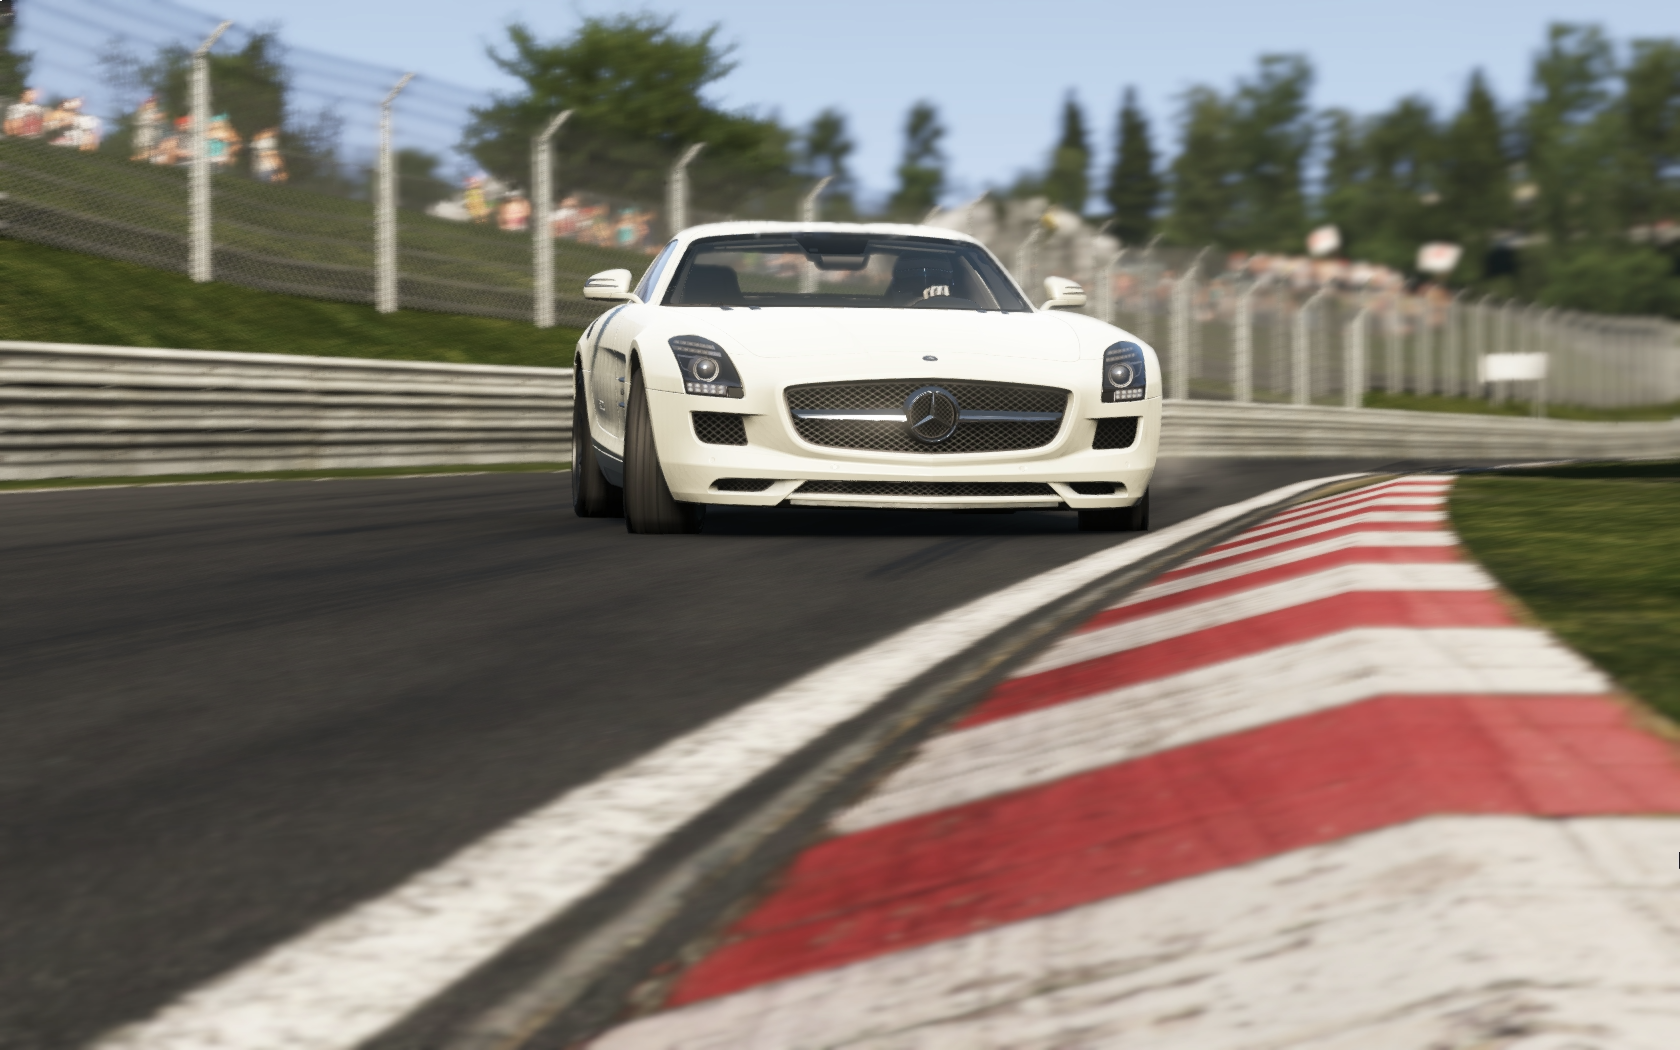 General 1680x1050 Project cars Mercedes-Benz Mercedes-Benz SLS AMG Nurburgring racing car drift vehicle white cars video games PC gaming screen shot